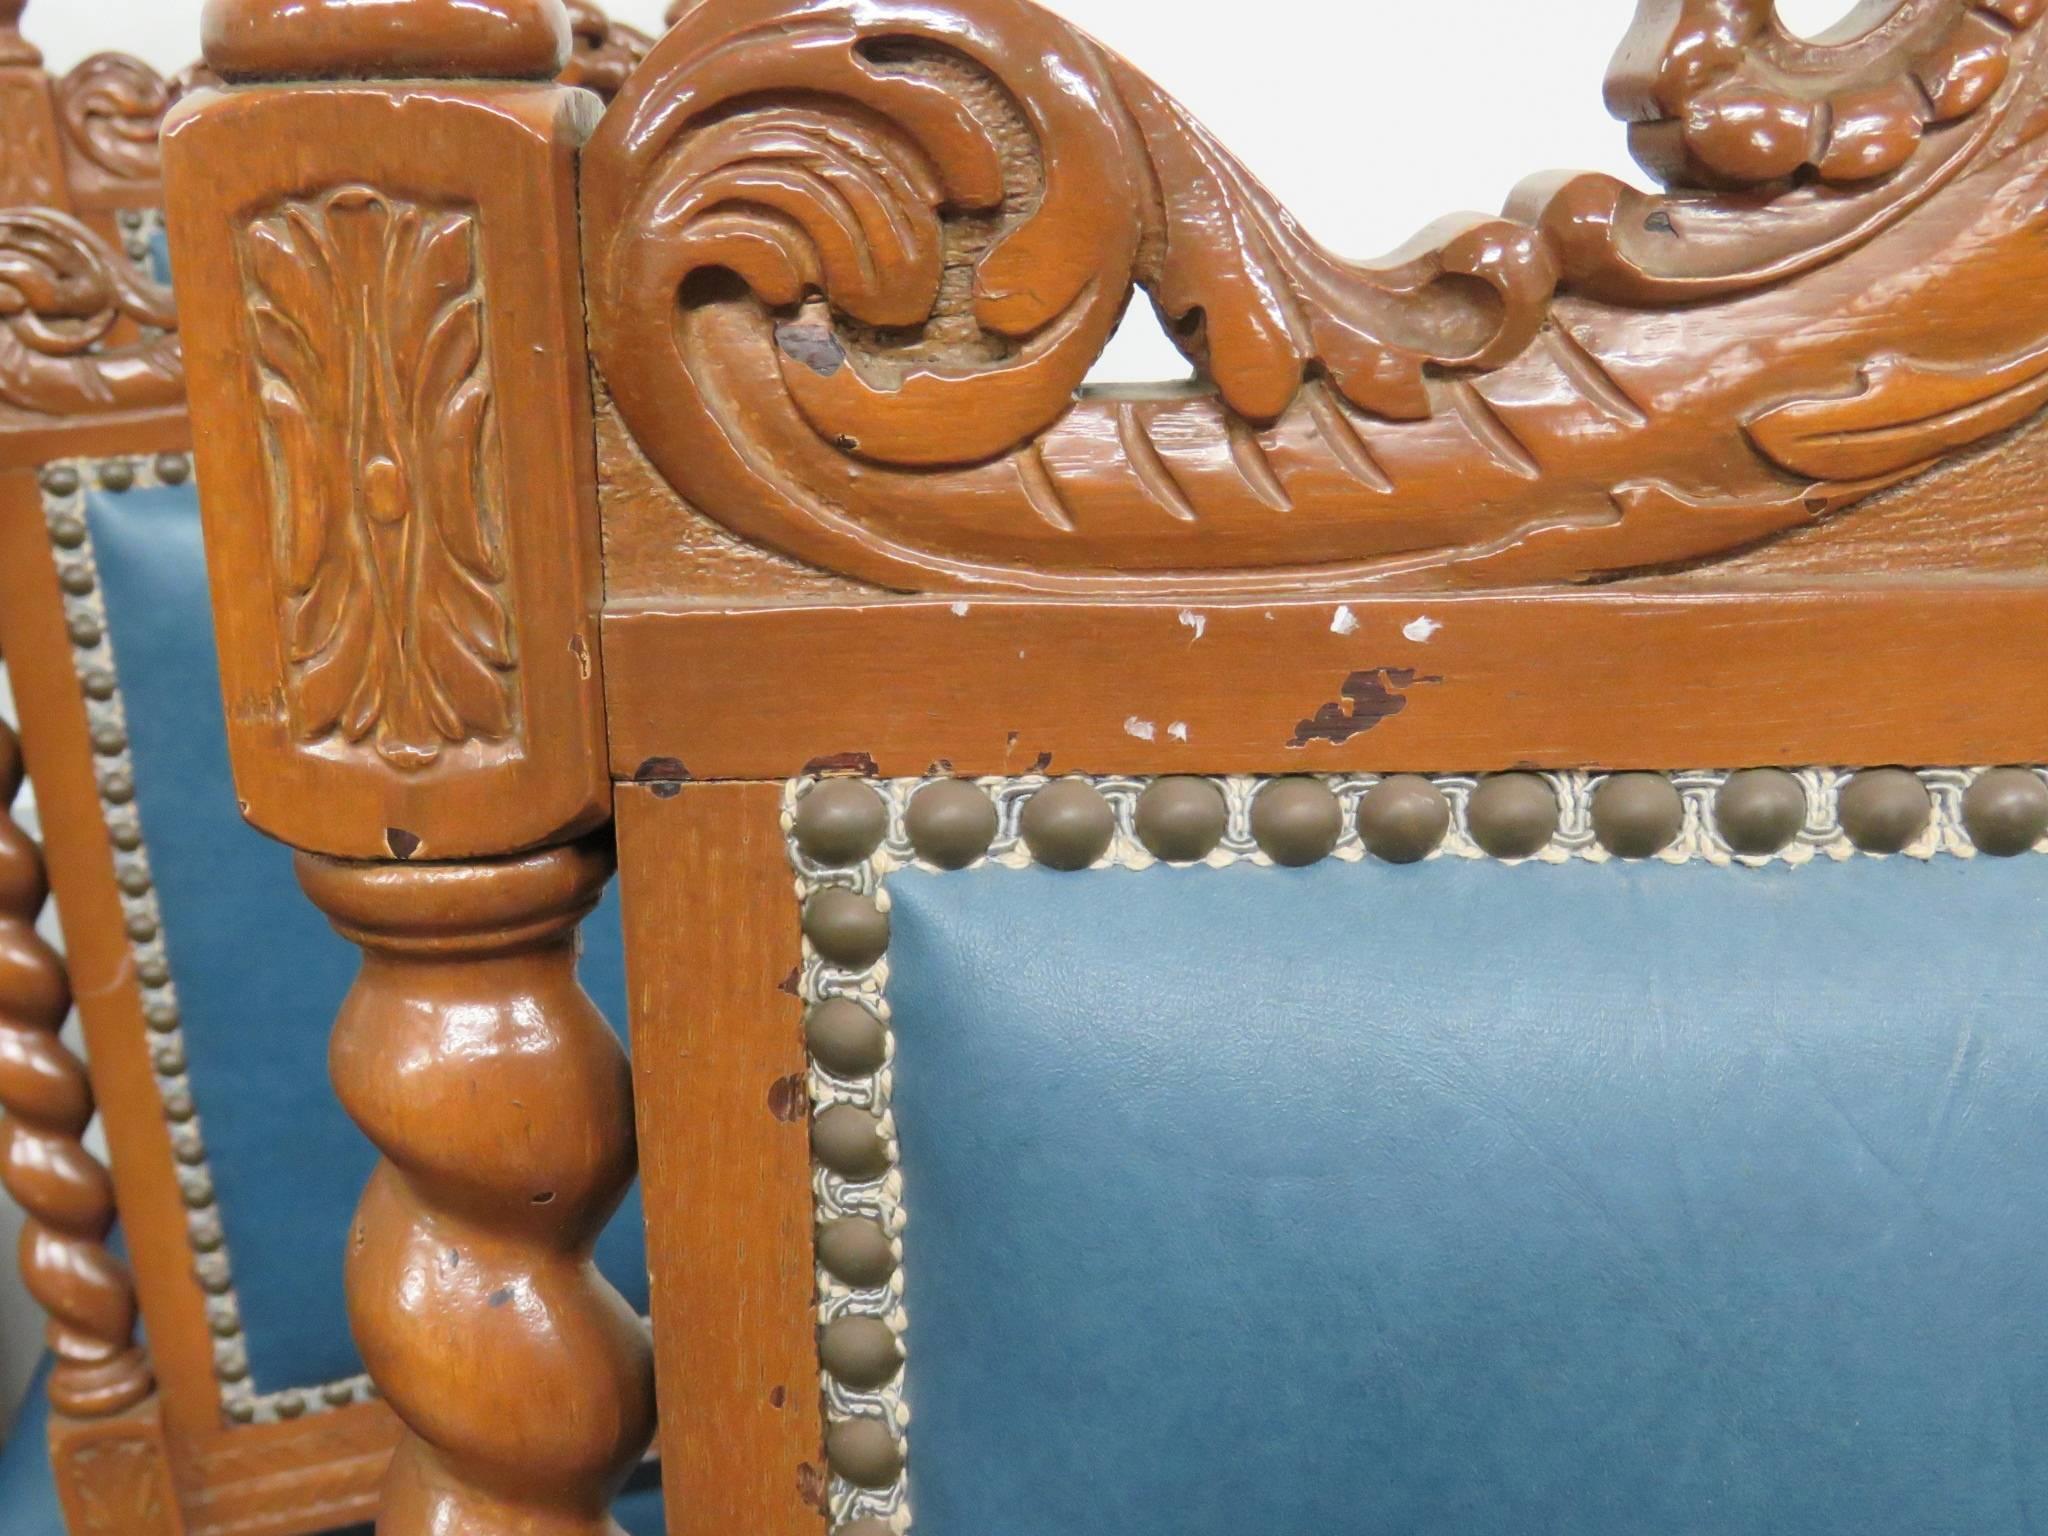 Dining chairs are intricately carved with griffins, barley twists and plumes. Dining chairs have blue Naugahyde with brown painted frames.